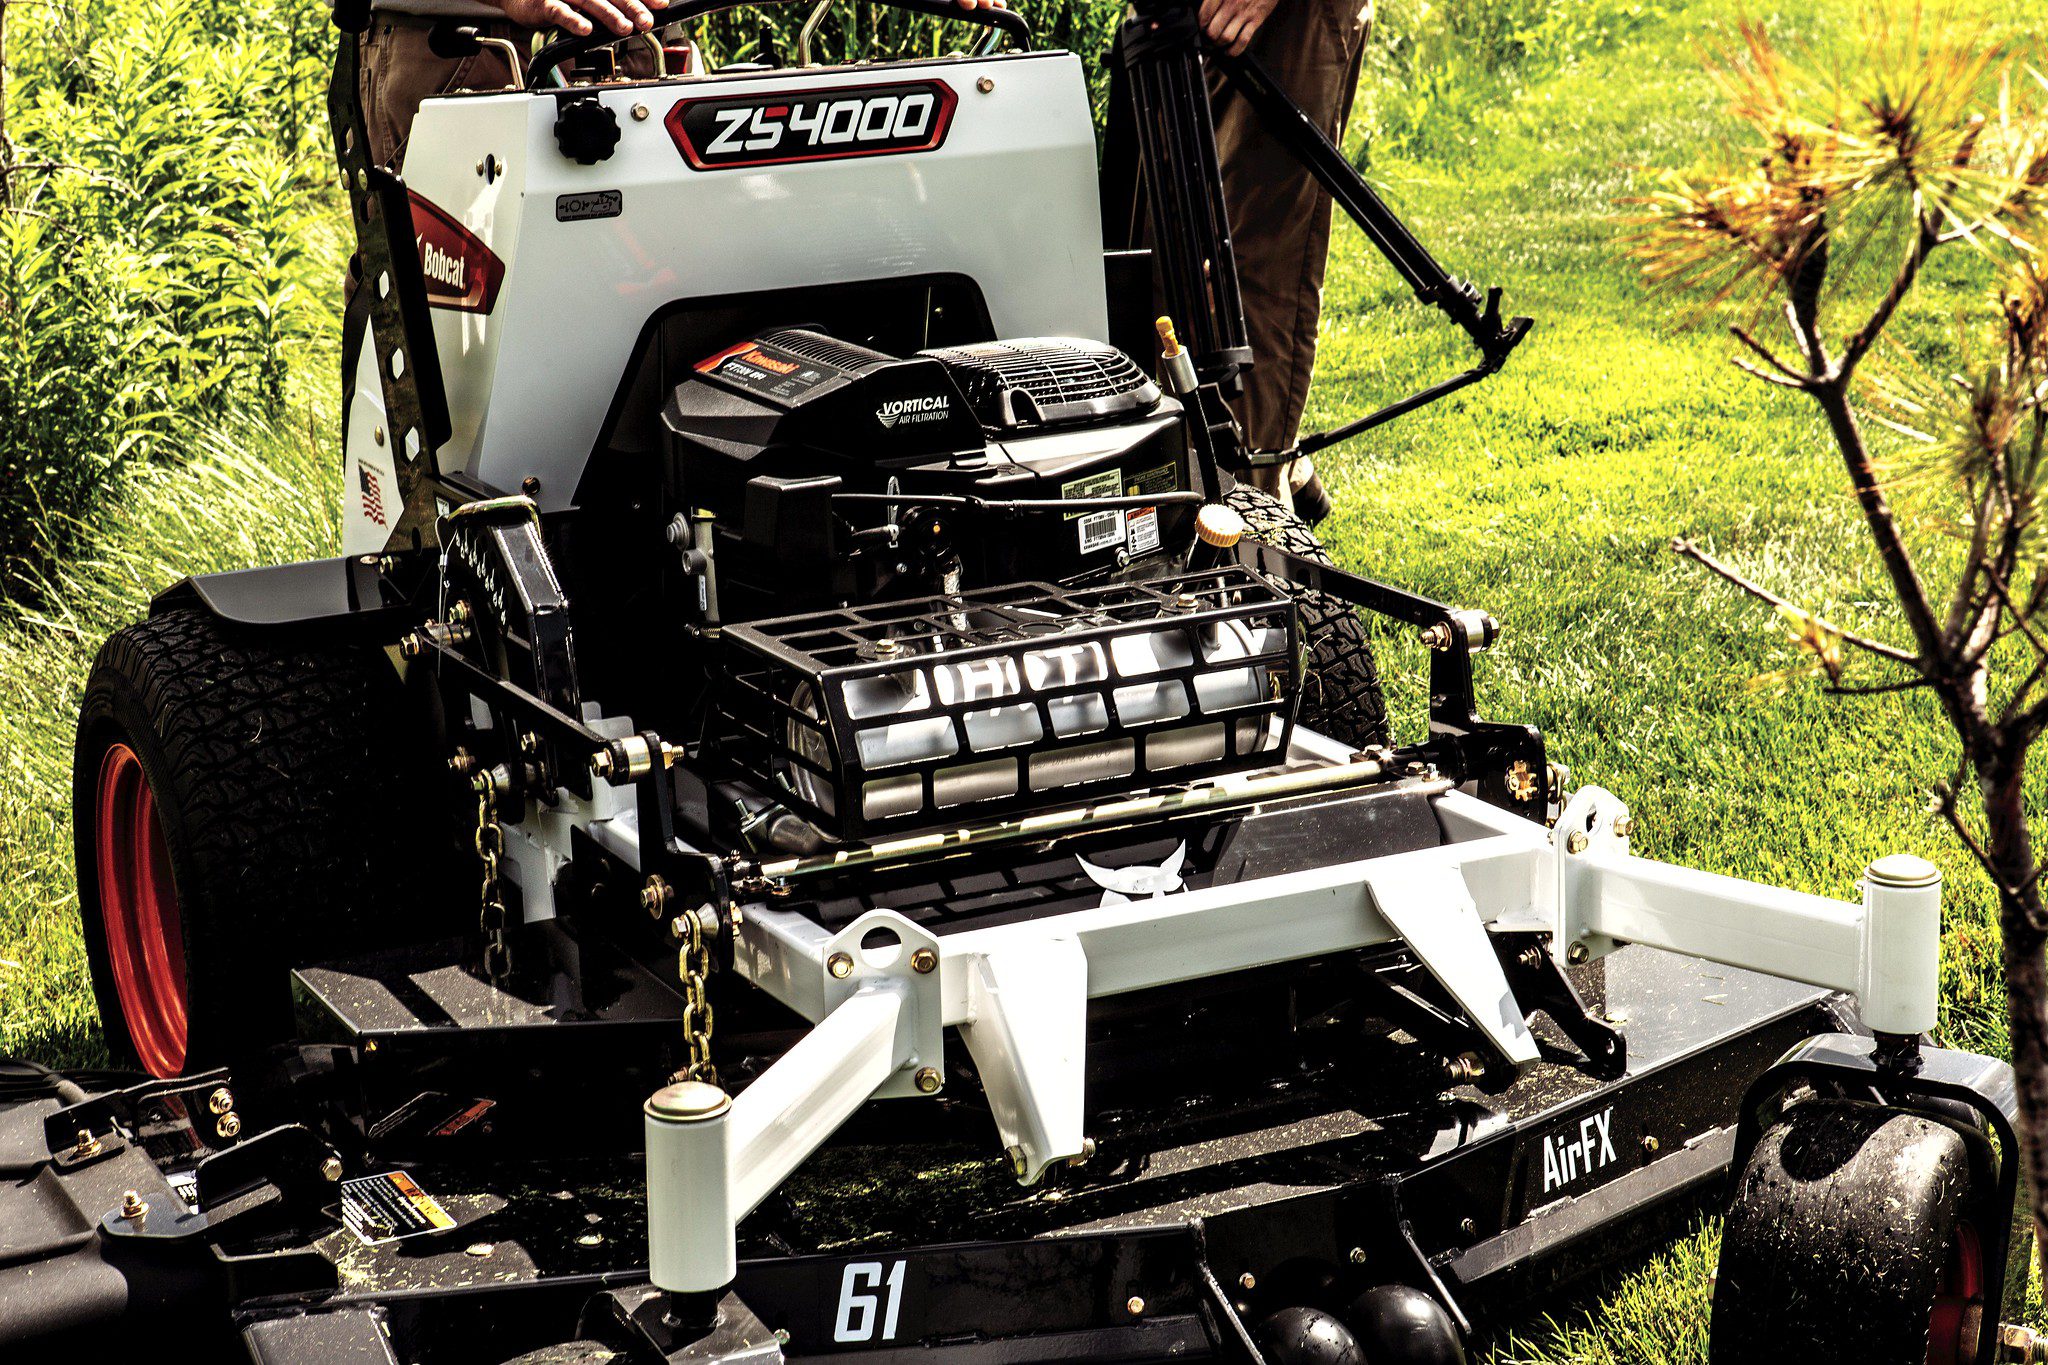 Browse Specs and more for the Bobcat ZS4000 Stand-On Mower 61″ - White Star Machinery